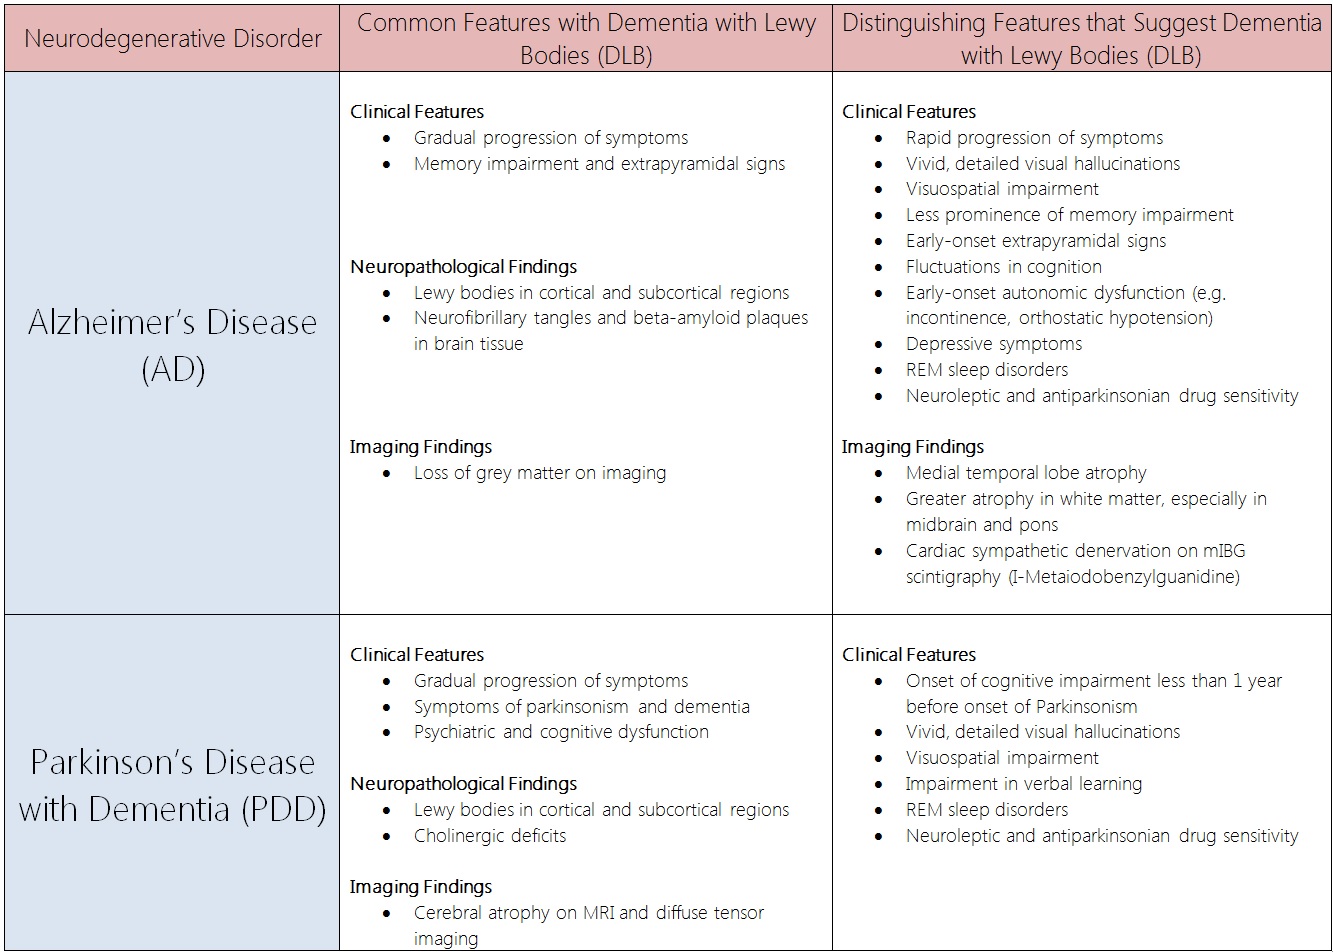 File:Comparison Table Distinguishing Features Dementia with Lewy Bodies vs. Alzheimer's disease and Parkinson's disease with dementia.jpg